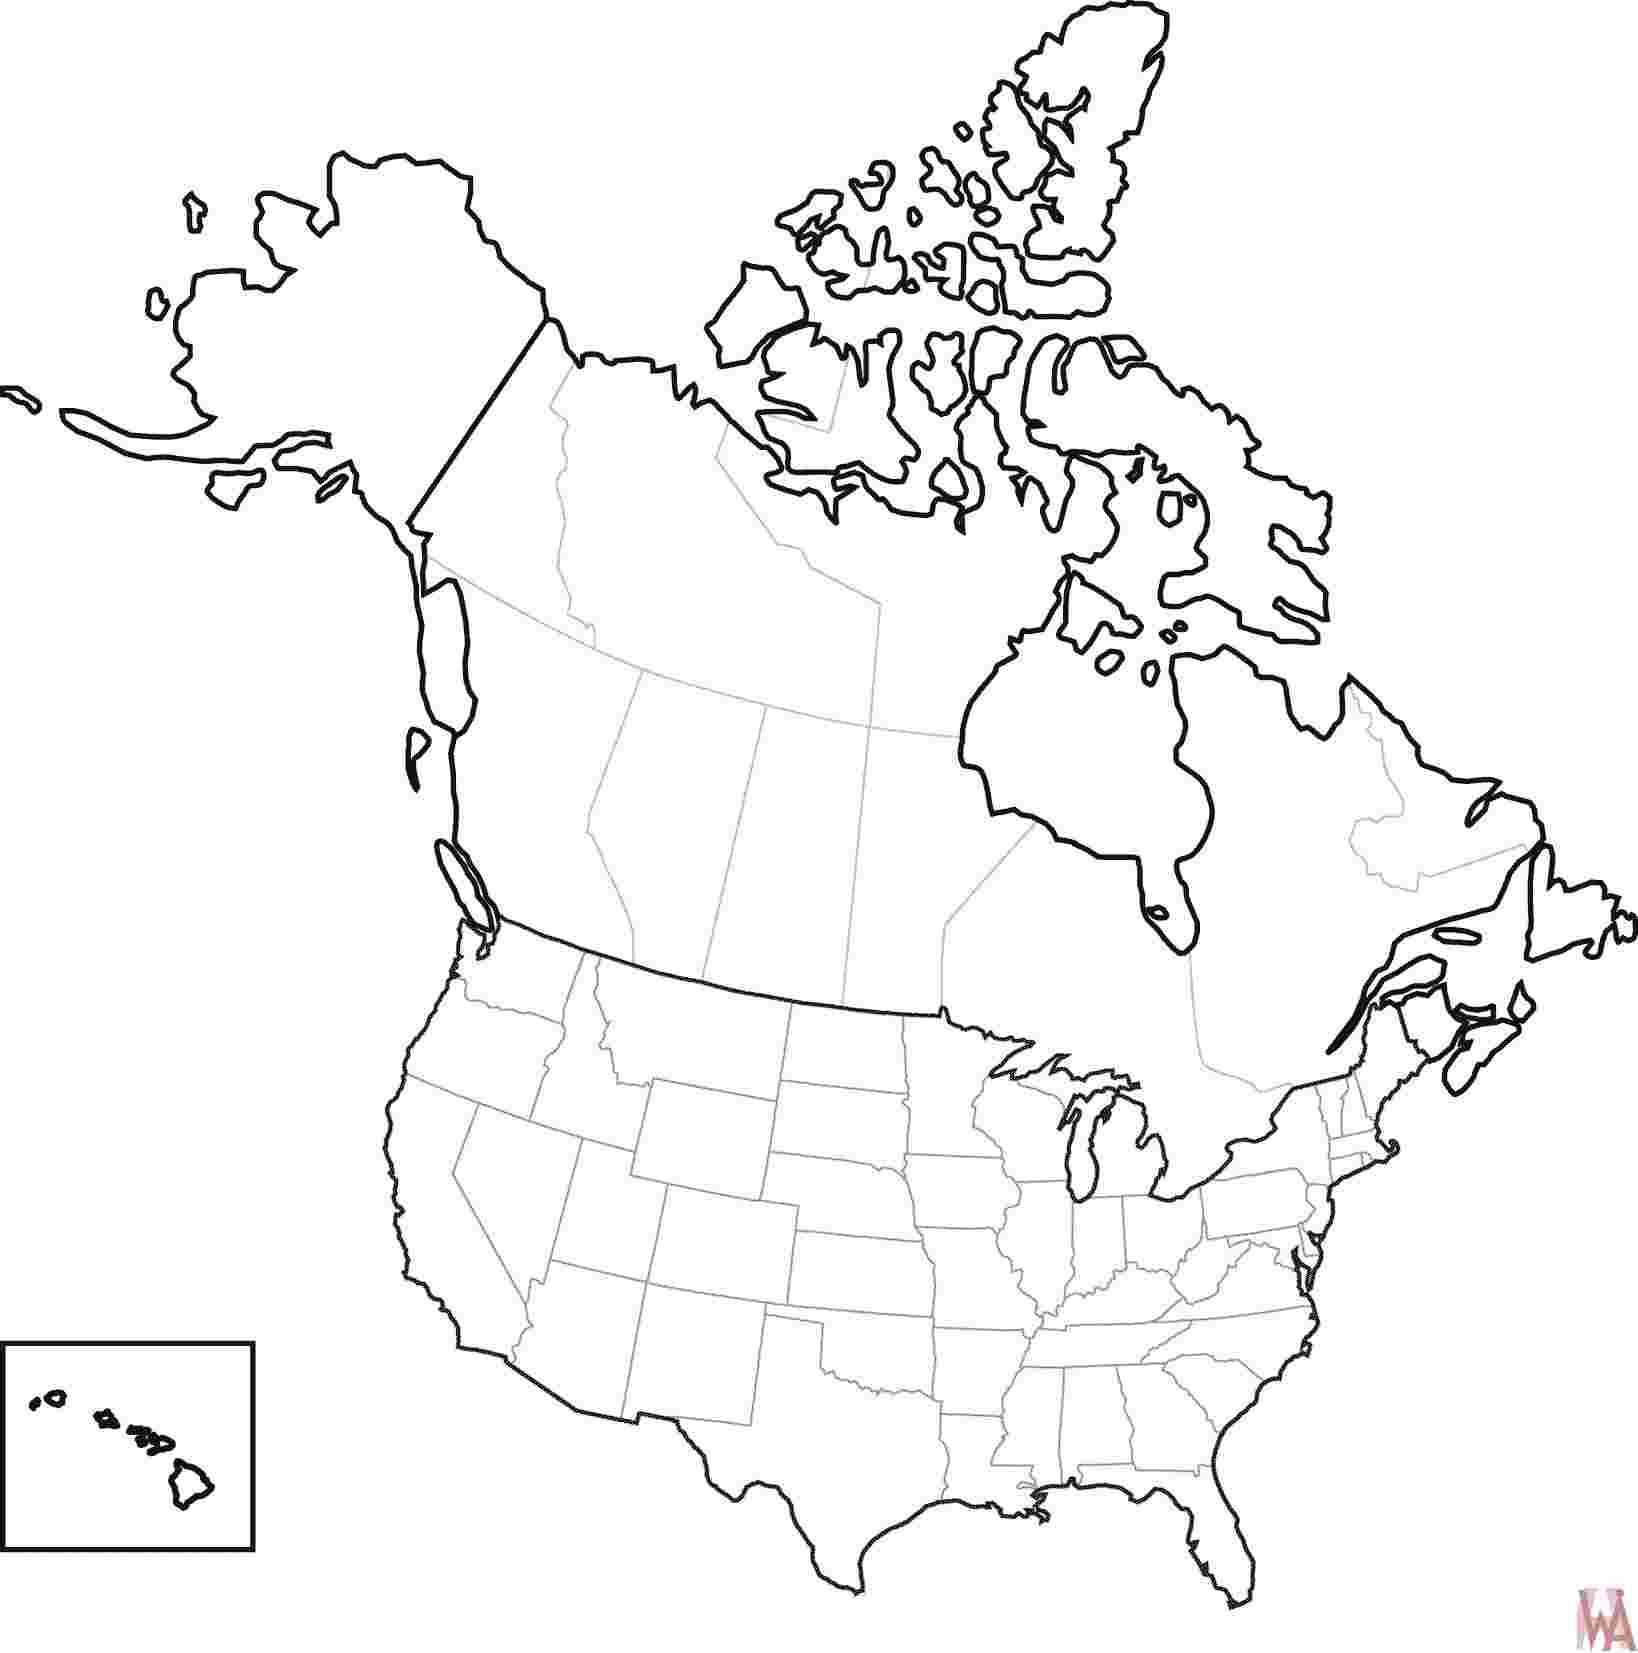 Blank Printable Map Of The United States And Canada Blank In Blank Template Of The United States